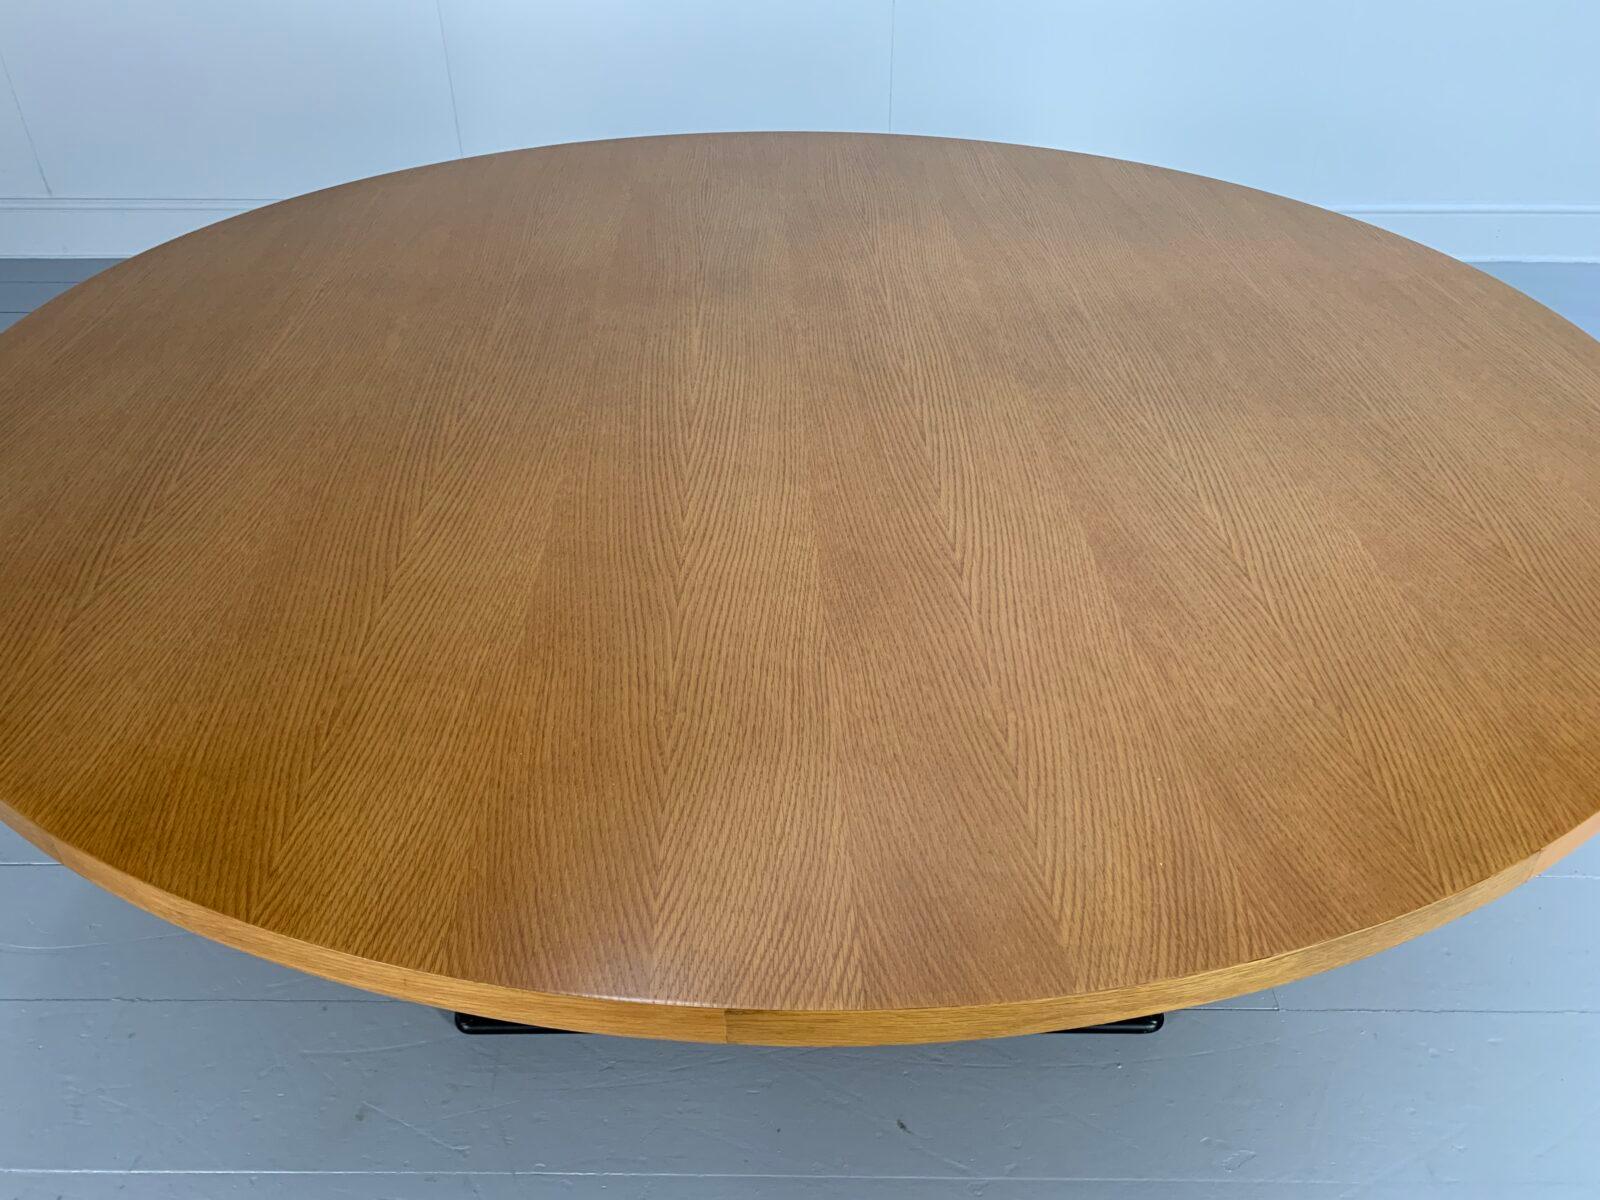 Cassina Le Corbusier “LC15” Round Circular Dining Table – In Natural Oak 1